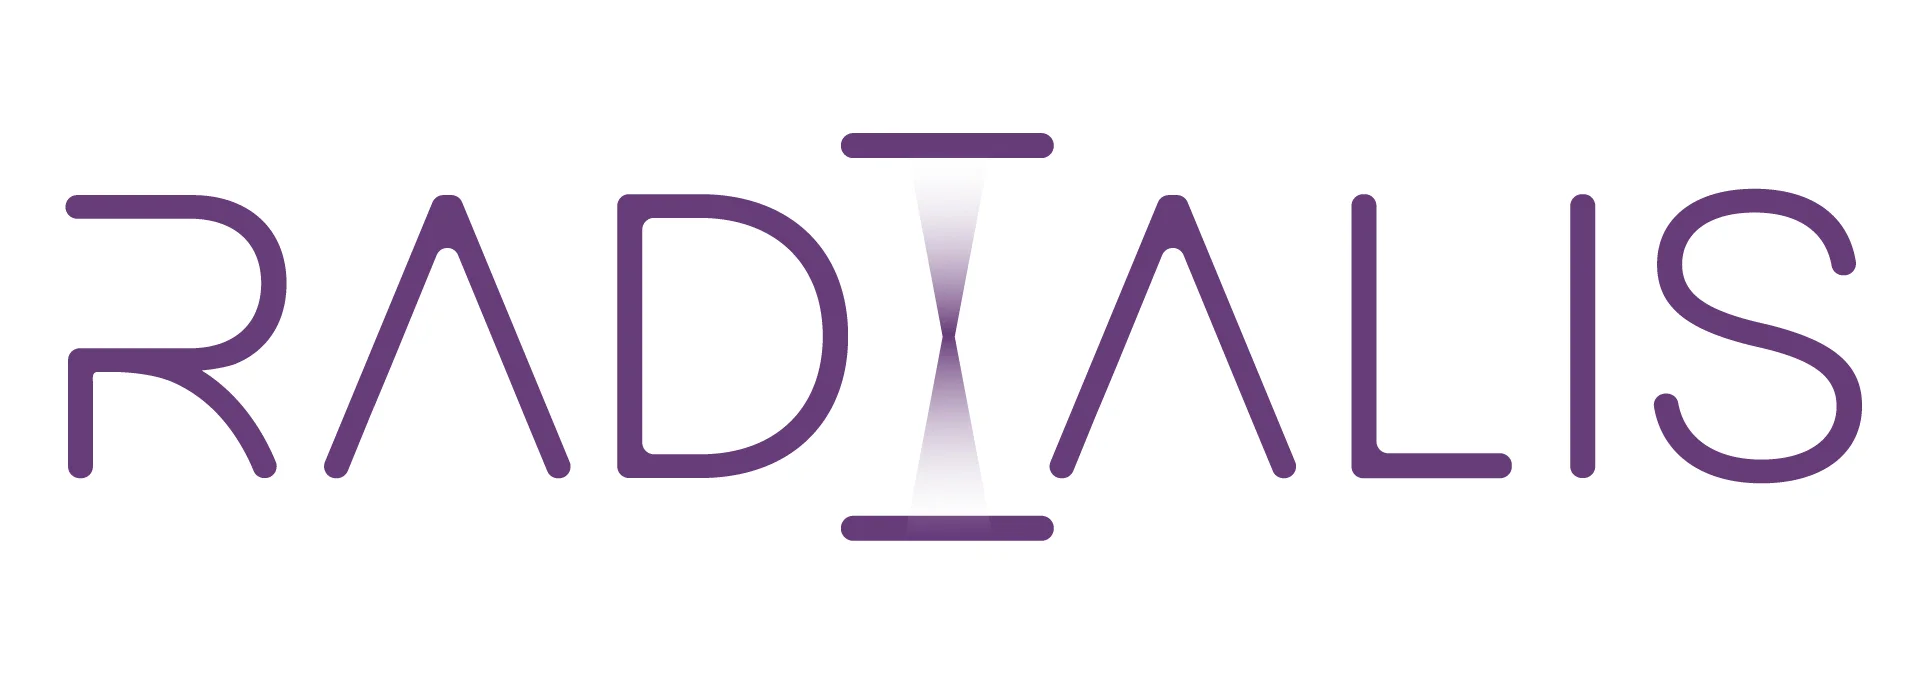 Radialis logo in purple with white background.